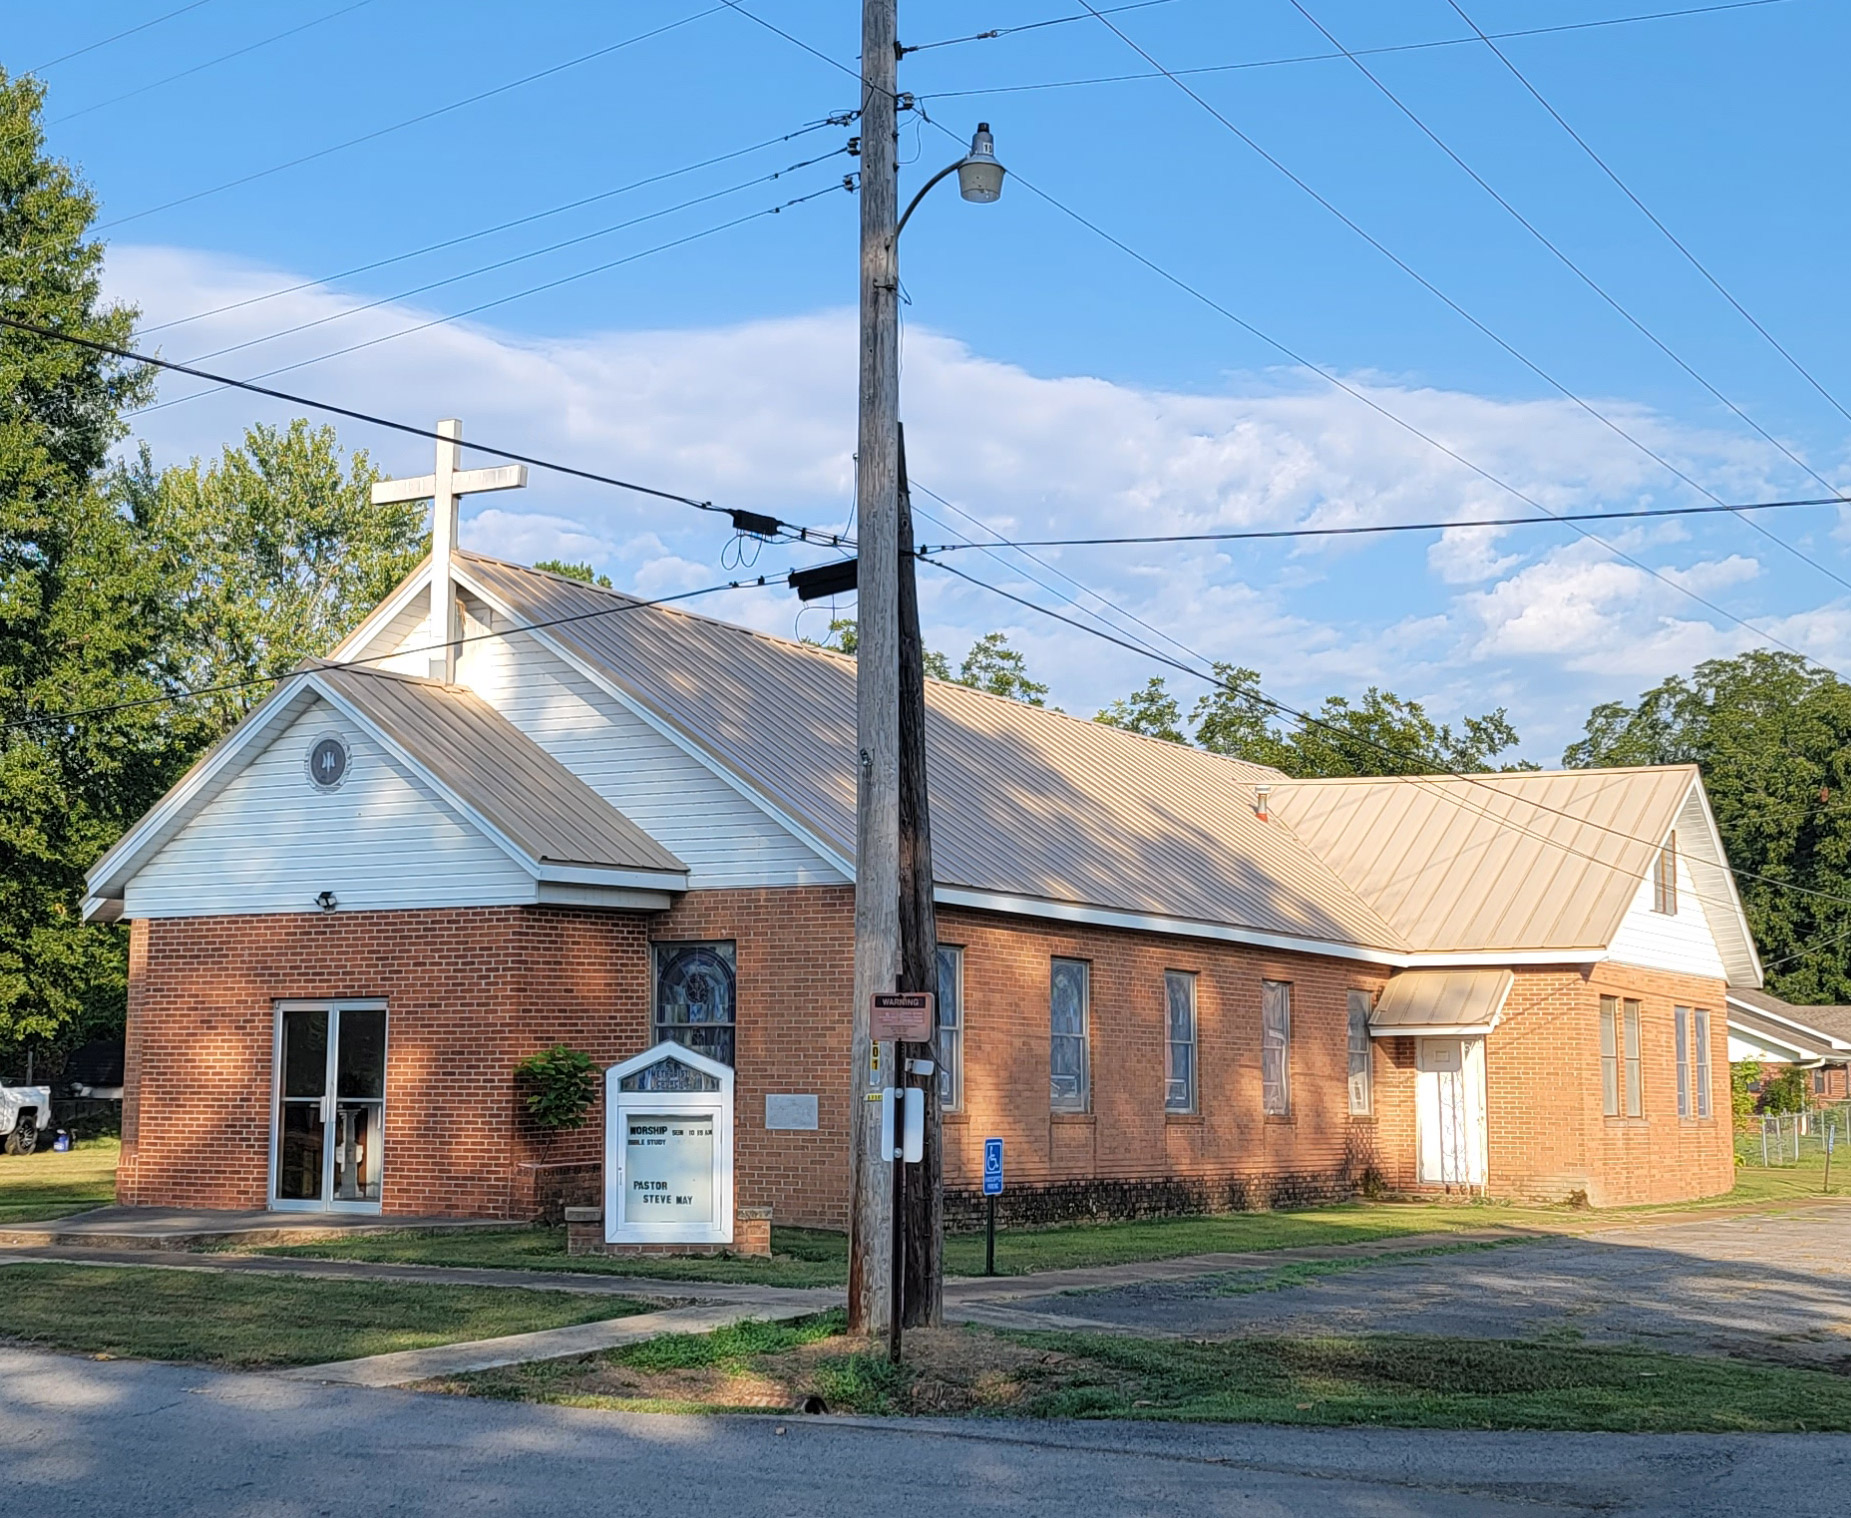 Orange-red brick church building with stained glass windows and parking lot